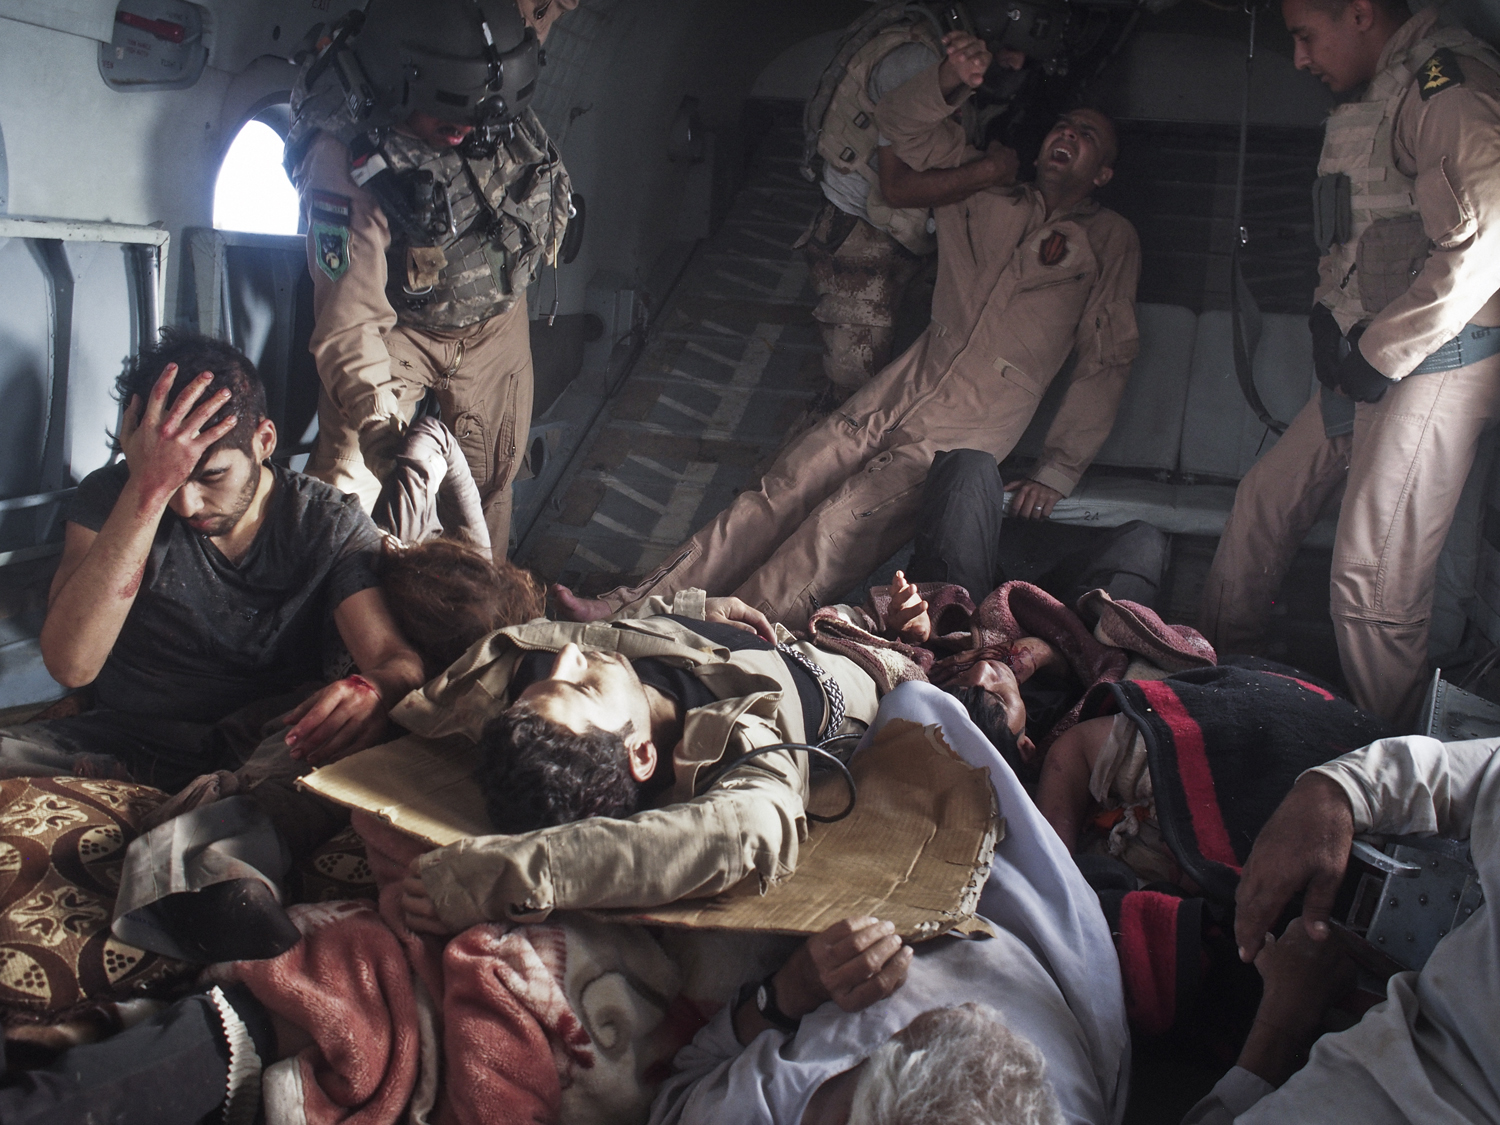 Aug. 12, 2014. Survivors of the Sinjar crash, including Yezidis and Kurdish and Iraqi military personnel, are loaded onto a second rescue helicopter bound for Kurdish territory. The pilot killed in the crash lies under the wounded.